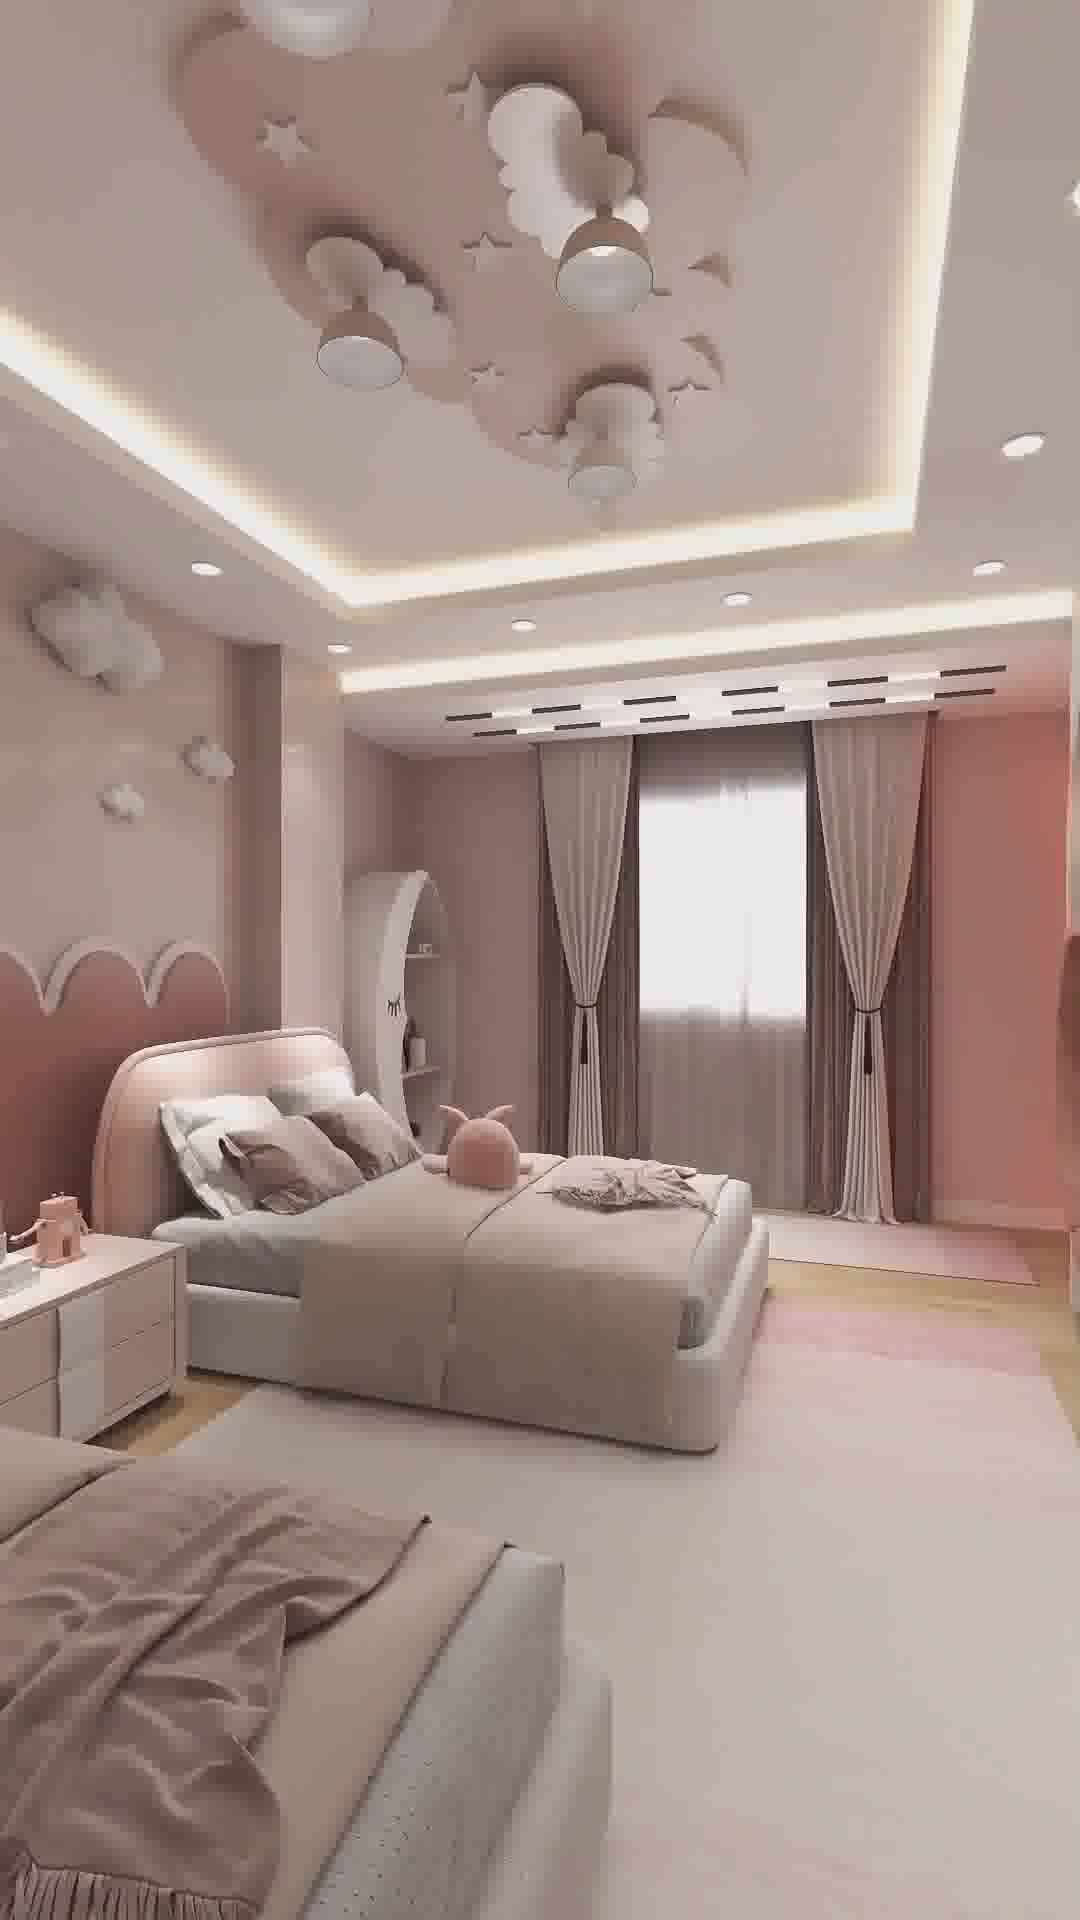 Looking for one-stop interior design solutions for your dream home or office? 😍
At Lilac Interior, we don't just build homes but craft your desires into fresh designs to make you fall in love with your home! ✨
Get your dream home designed by us 💫furniture
📩 Comment or DM ' smart ' to order
📞Contact - 7701821801, 7000706455
💻 https://lilacinterior.com
Follow 👉@lilac_interior
Follow👉 @lilac_interior
Follow👉 @lilac_interior
➖➖➖➖➖➖➖➖
#interiordesign #designinterior #interiordesigner #designdeinteriores #interiordesignideas #interiordesigners #designerdeinteriores #interiordesigns #interiordesigninspiration
.
.
.
#memeindian
#memesociety
#indianjoke
#desitrolls
#idioticsperm
#interiordesign #designinterior #interiordesigner #designdeinteriores #interiordesignideas #interiordesigners #designerdeinteriores #interiordesigns #interiordesigninspiration #interioresdesign #designdeinterior #interiorsdesign #designerinterior #interiorarchitectureanddesign #interiordesigninspo #interiordesig